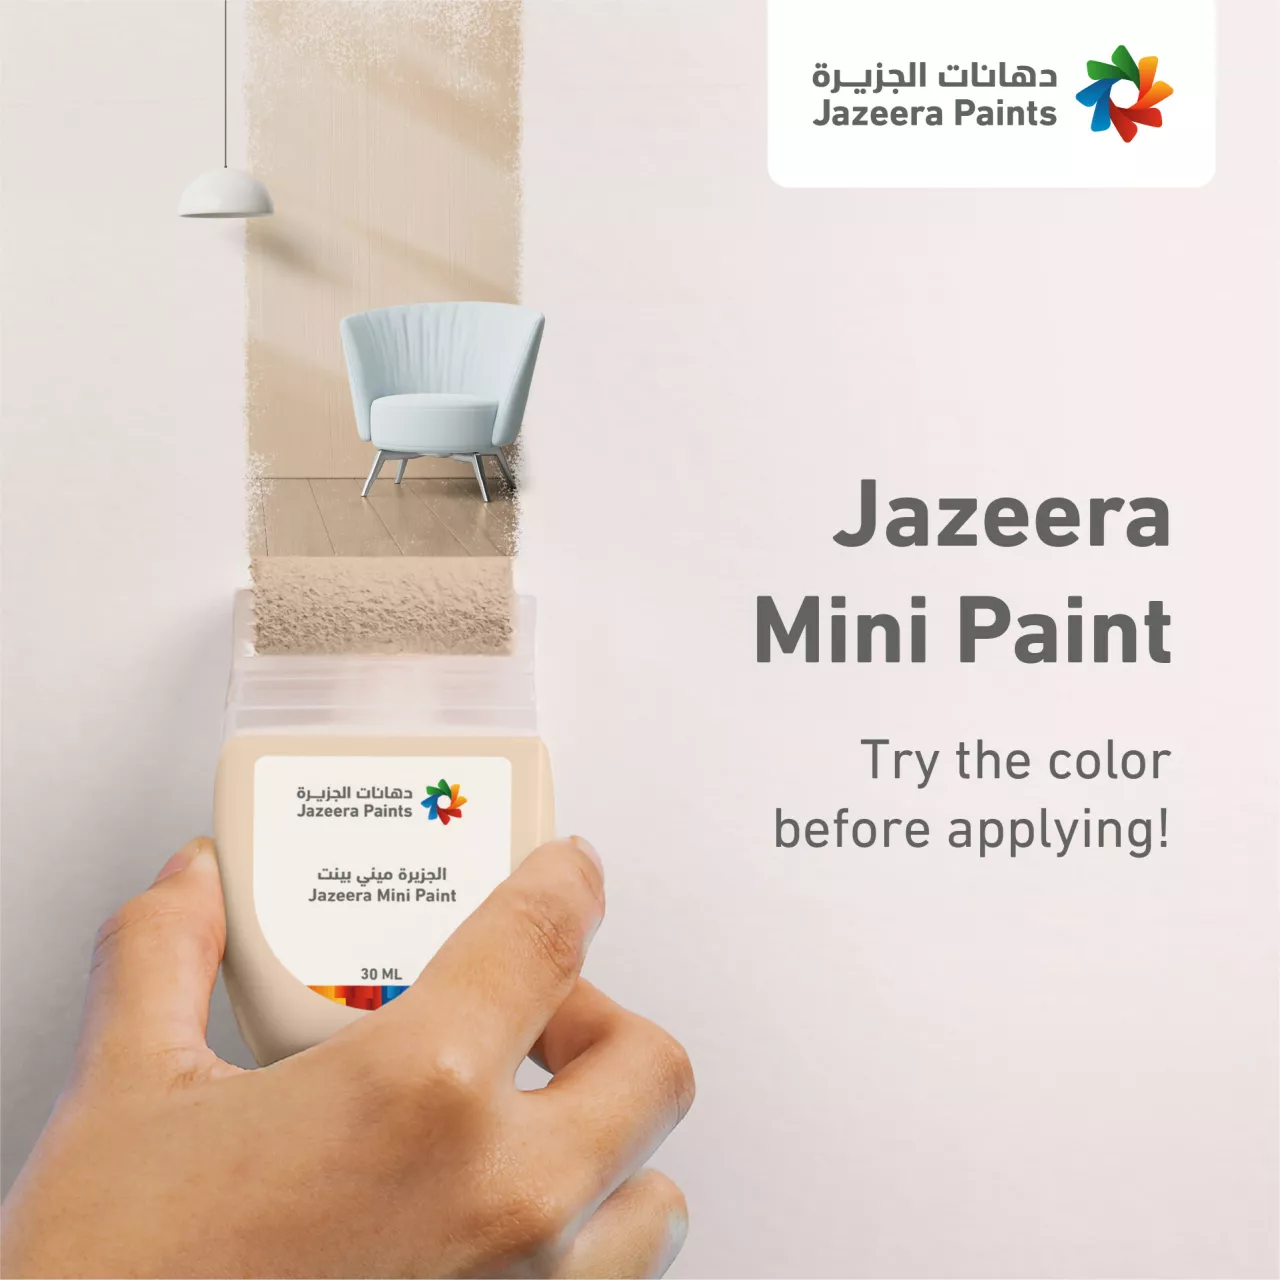 Mini Paint the Latest Product from Jazeera Paints to Test Colors on Walls img#1